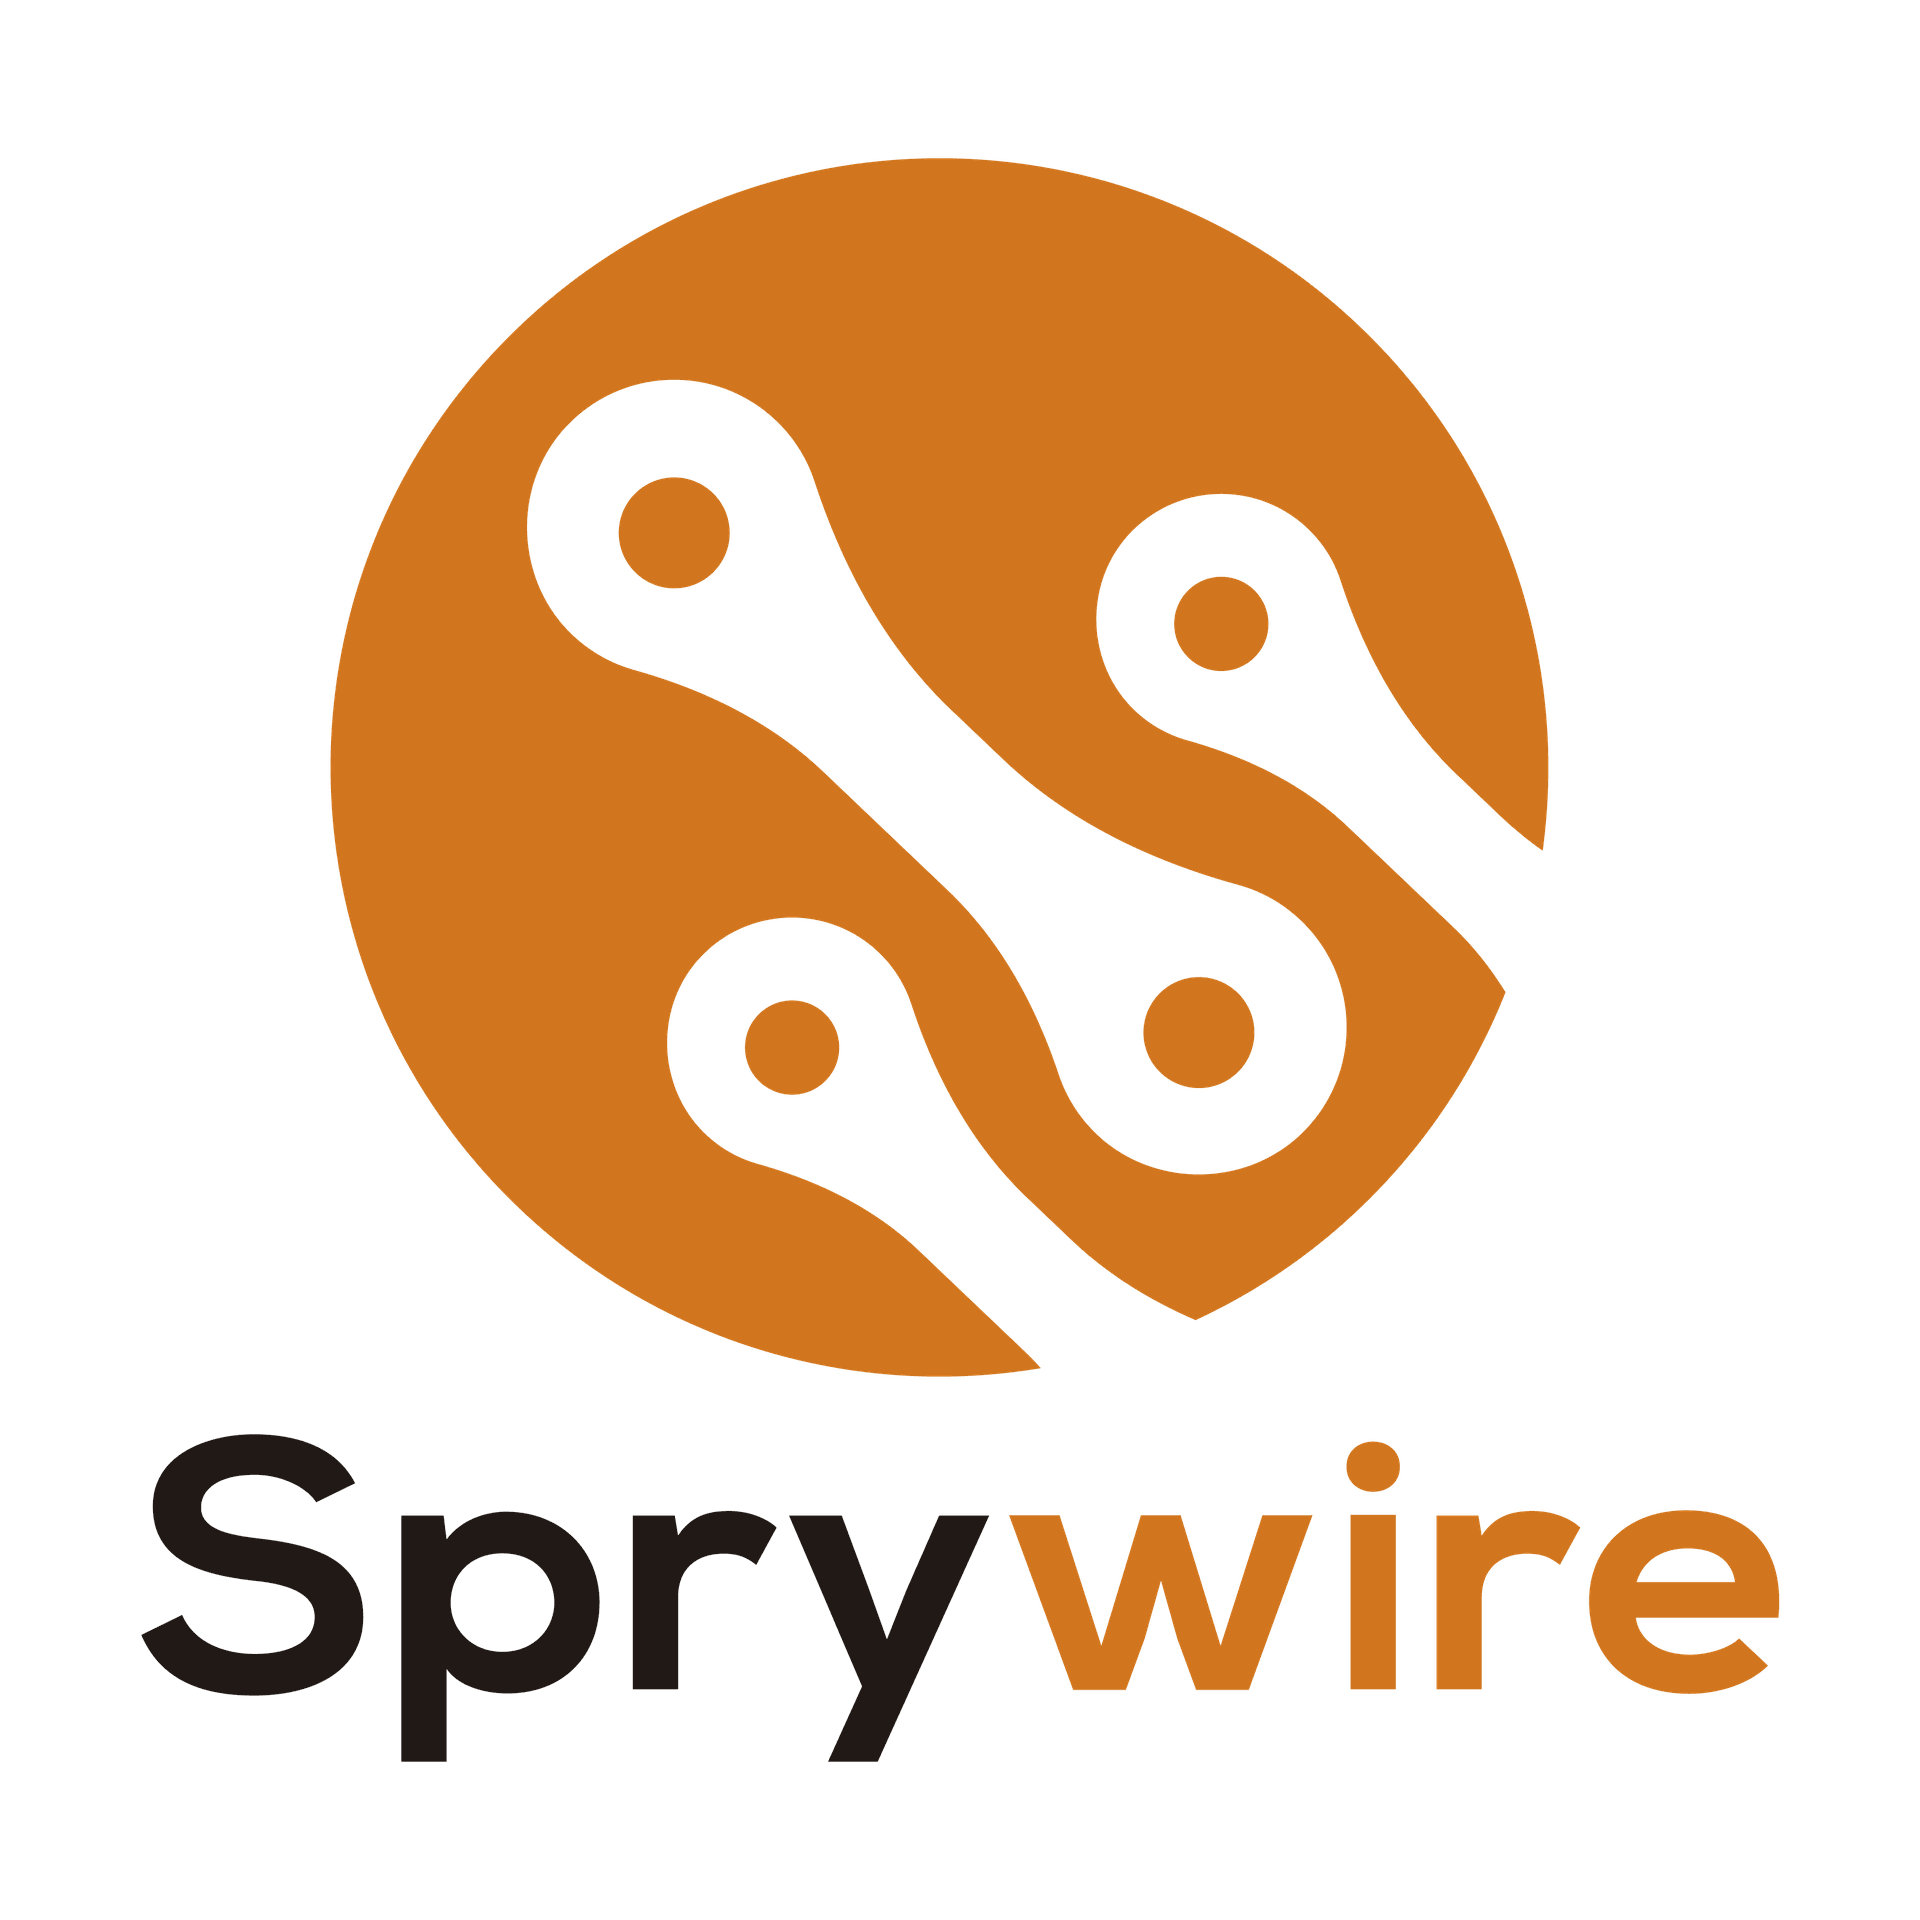 SPRYWIRE